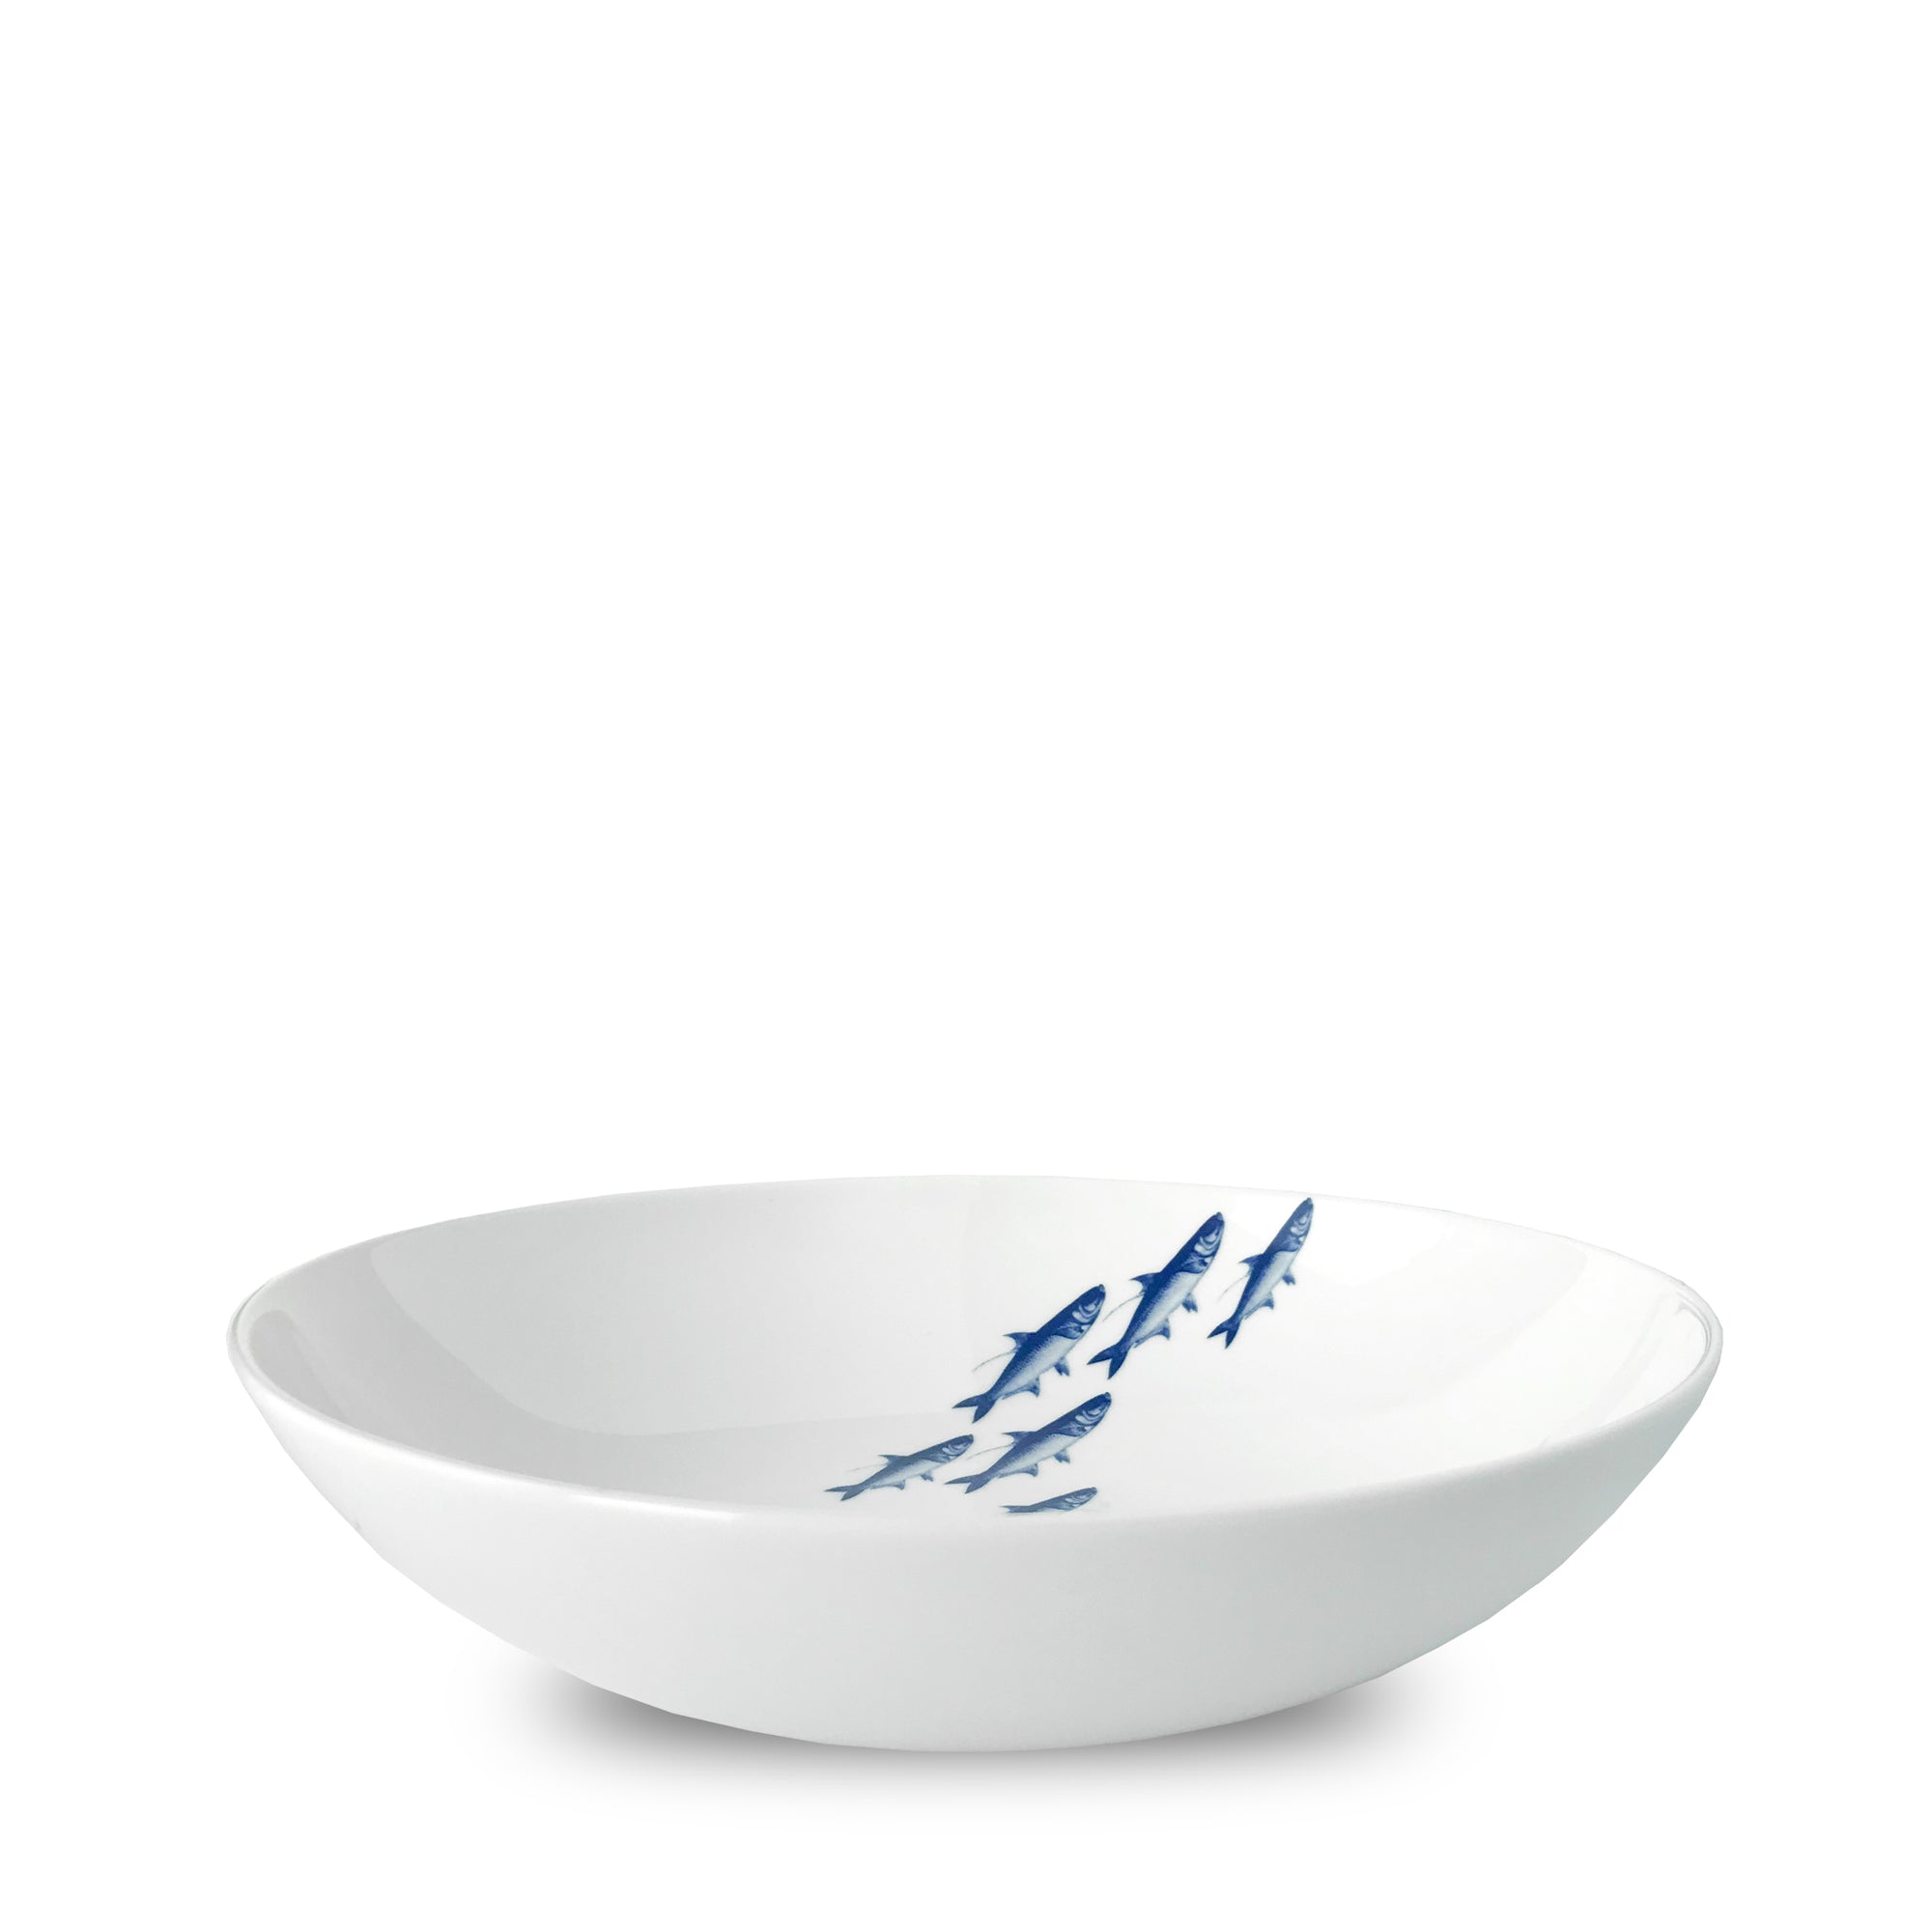 A Caskata Artisanal Home School Fish Entrée Bowl, decorated with a school of blue fish in the center, perfect for any dinnerware collection.